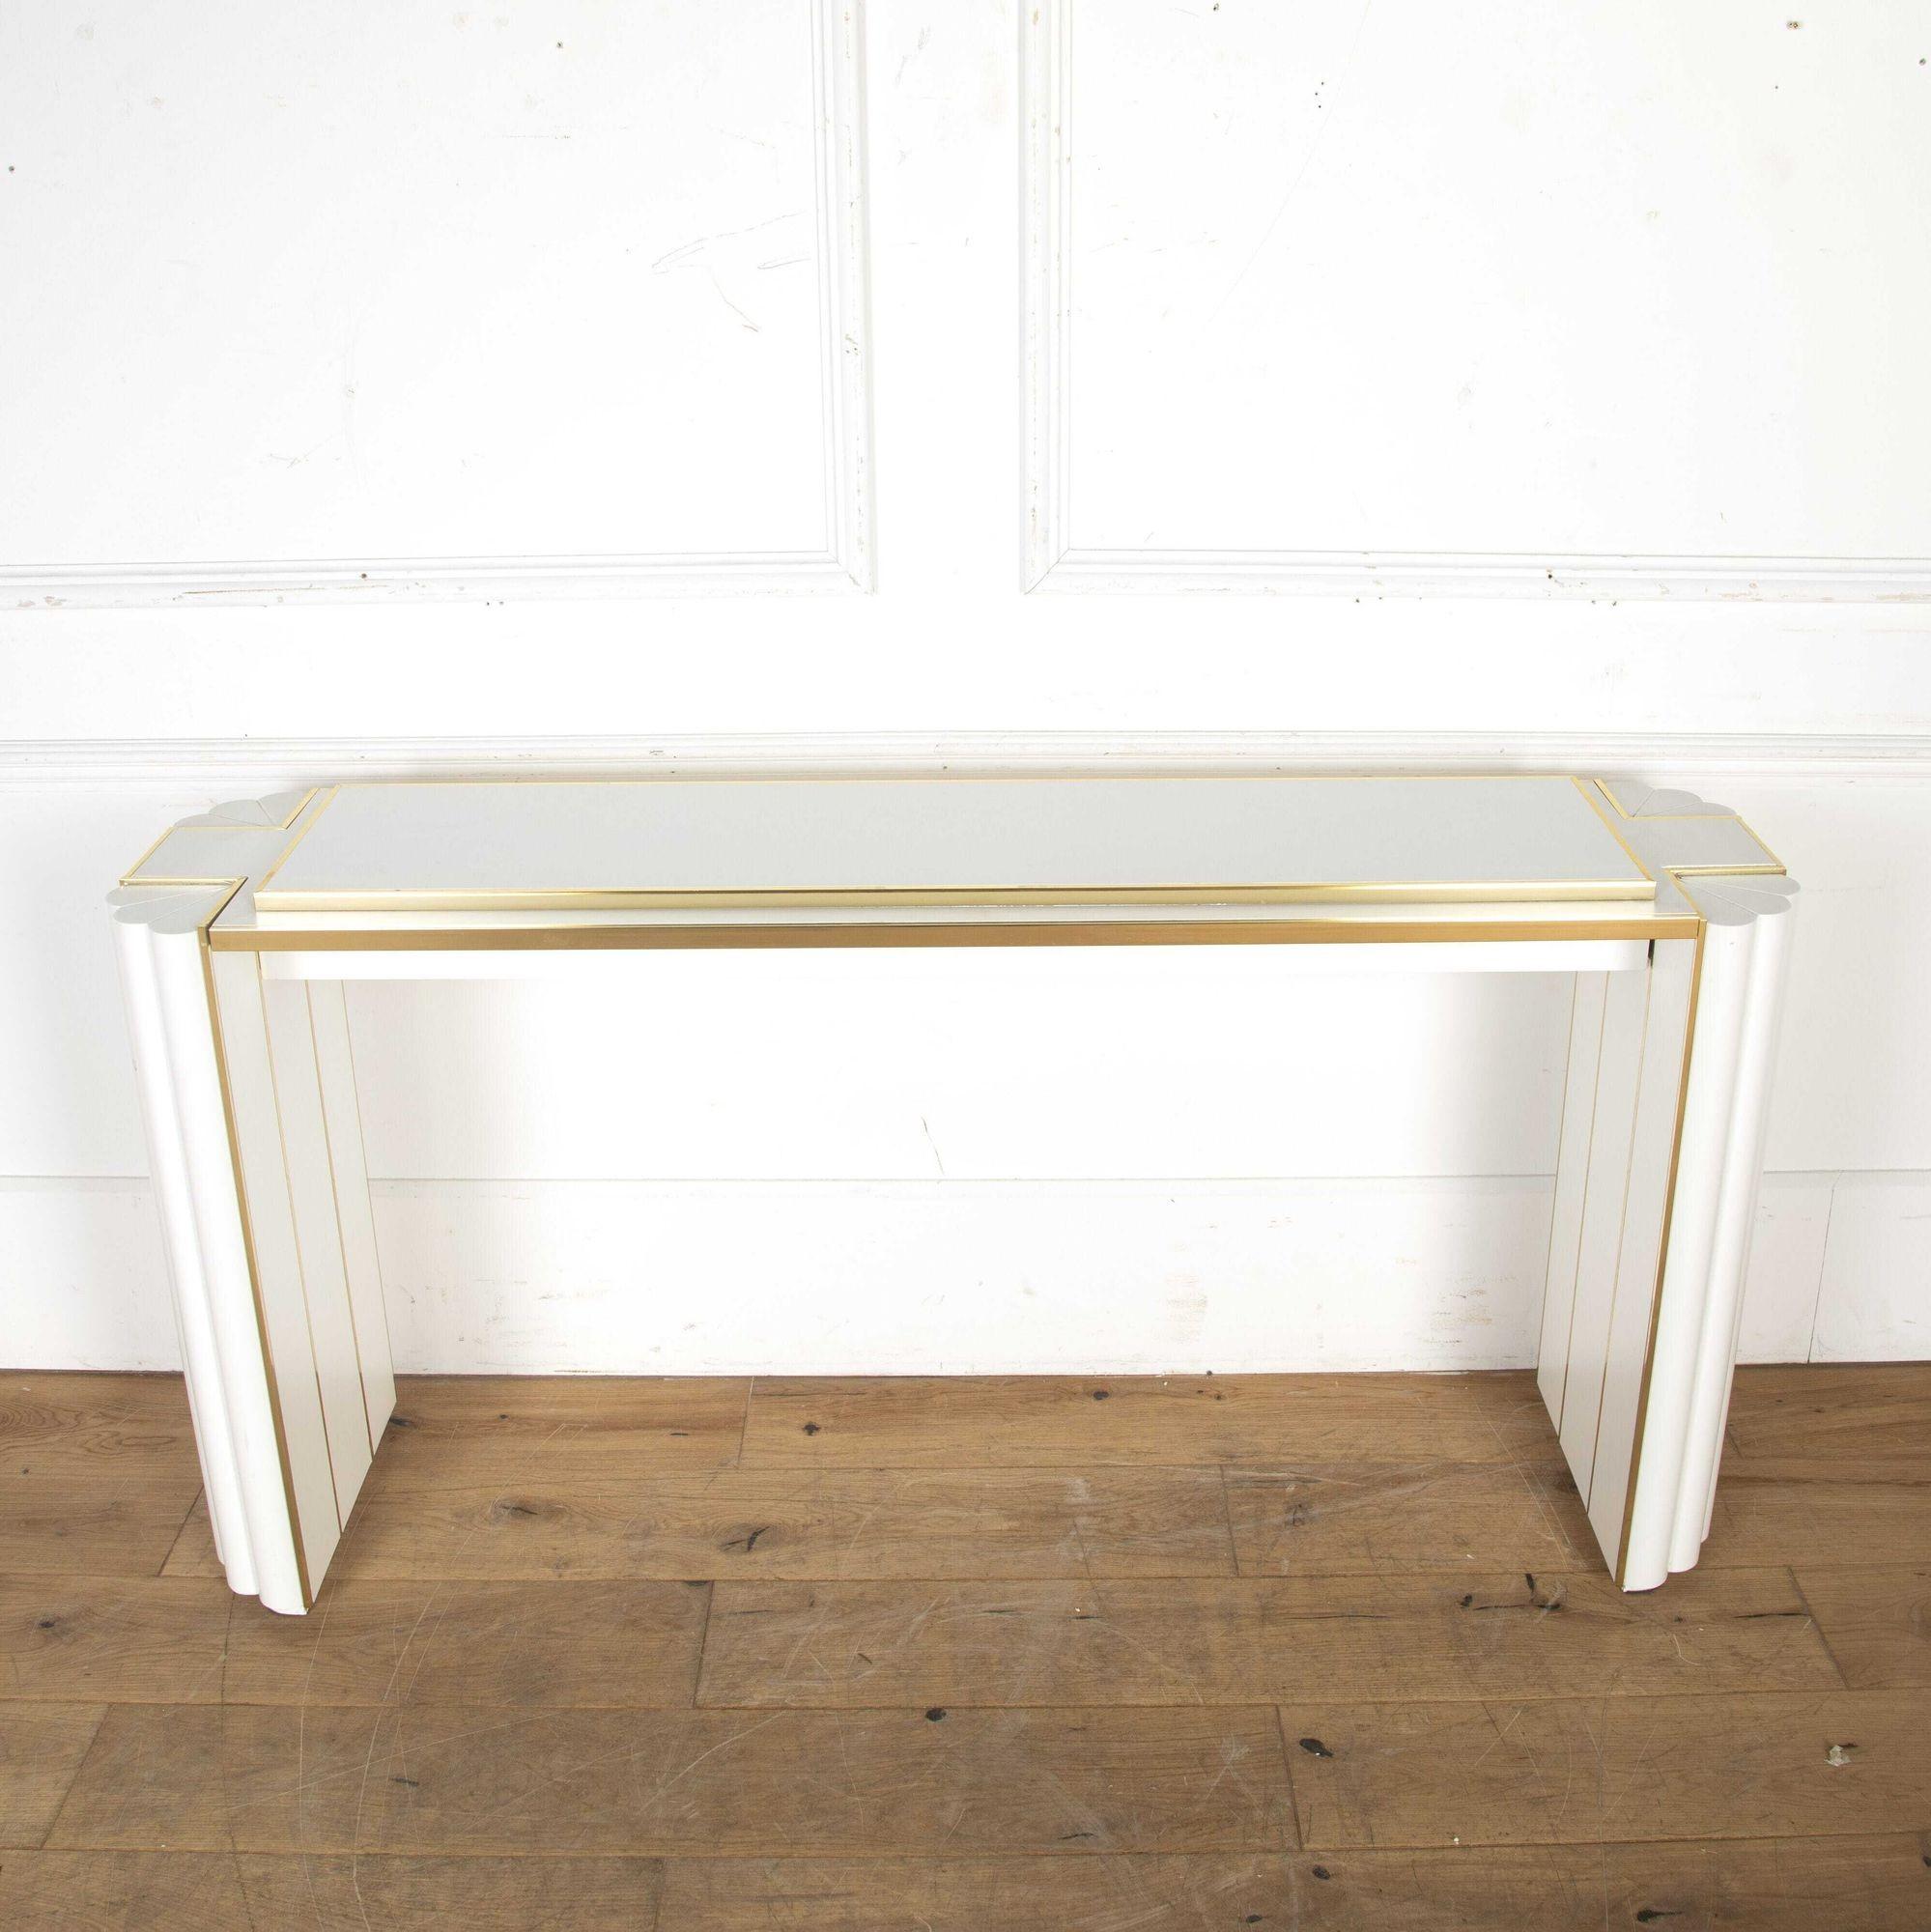 French 1980’s extra-wide modern console table by Alain Delon.
Signed by artist.
Alain Delon is known for his roles in such films as The Leopard and Le Samourai, however, in the 1970s Delon brought his sense of style to the world of furniture